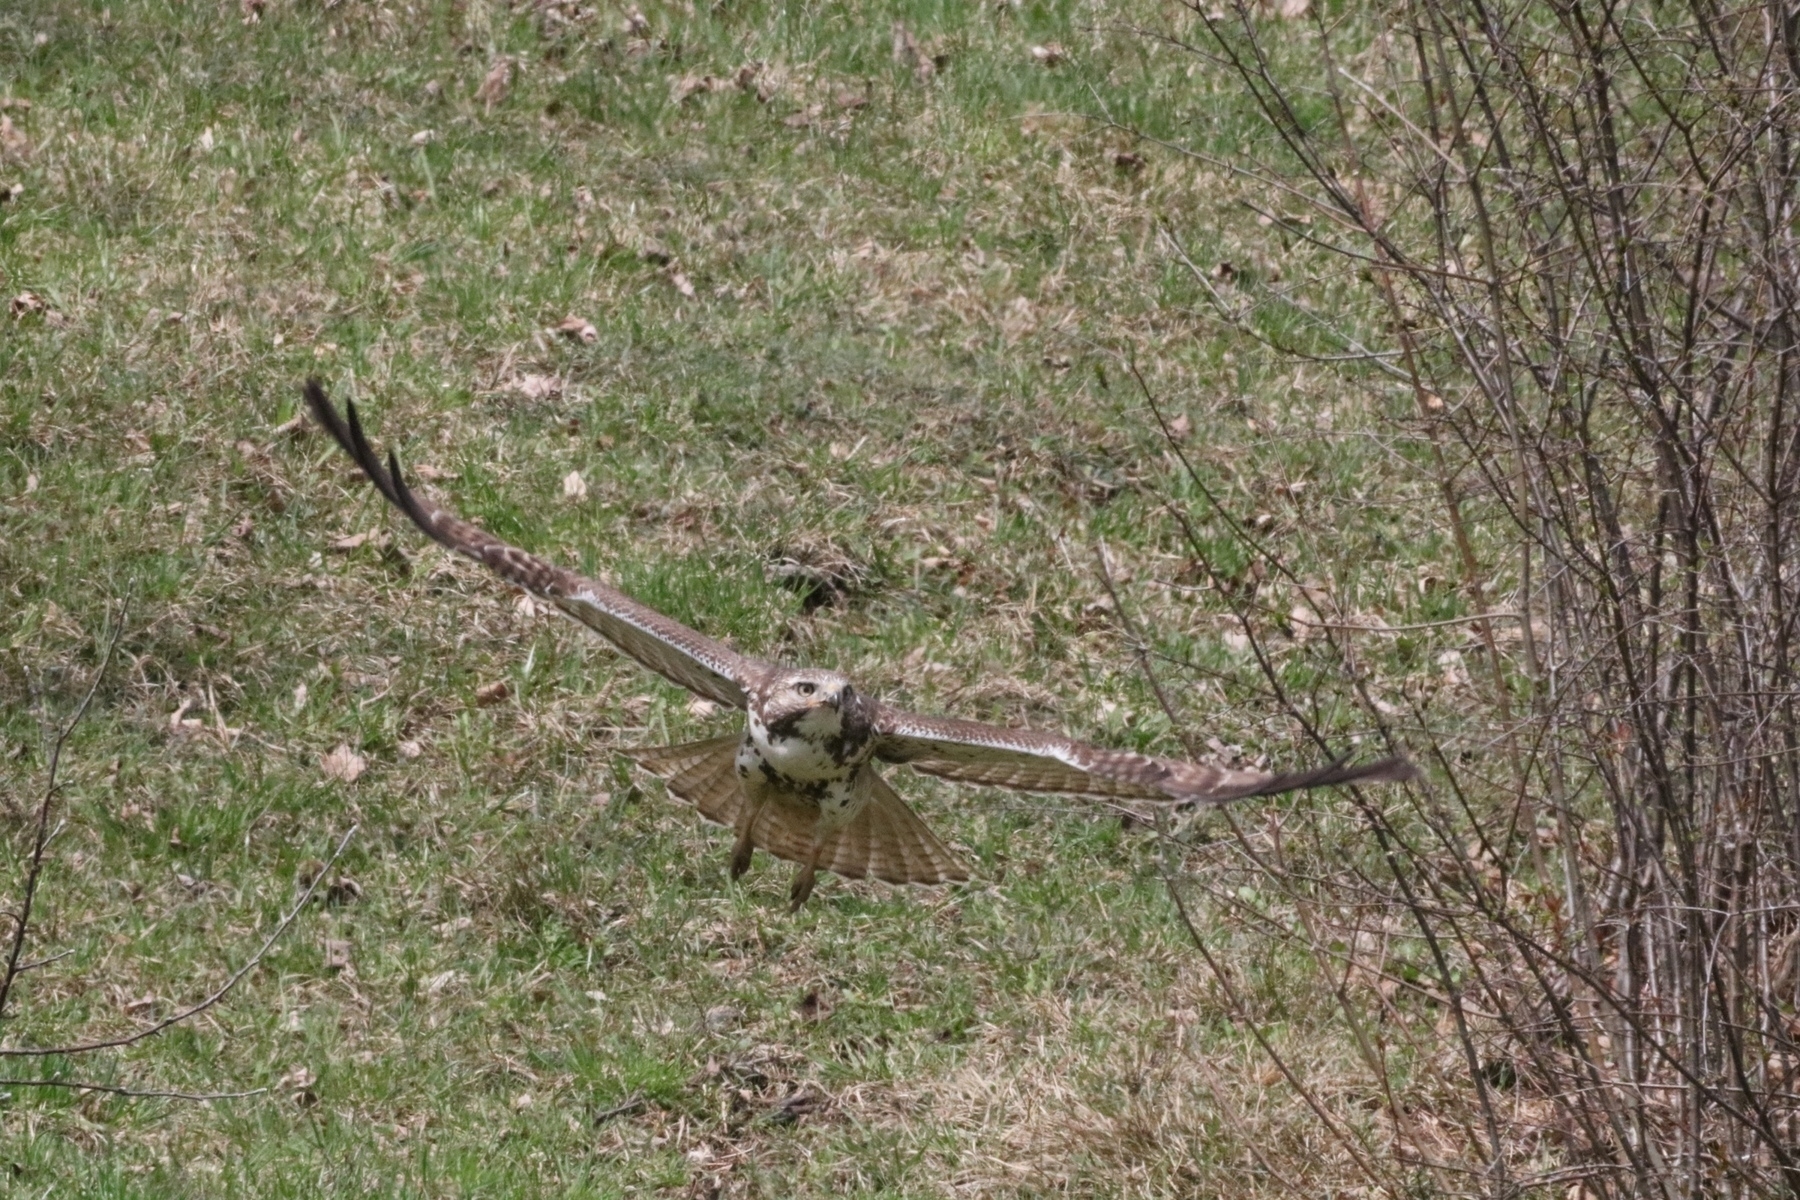 hawk in flight with wings extended. it is very close to the grass and a bush